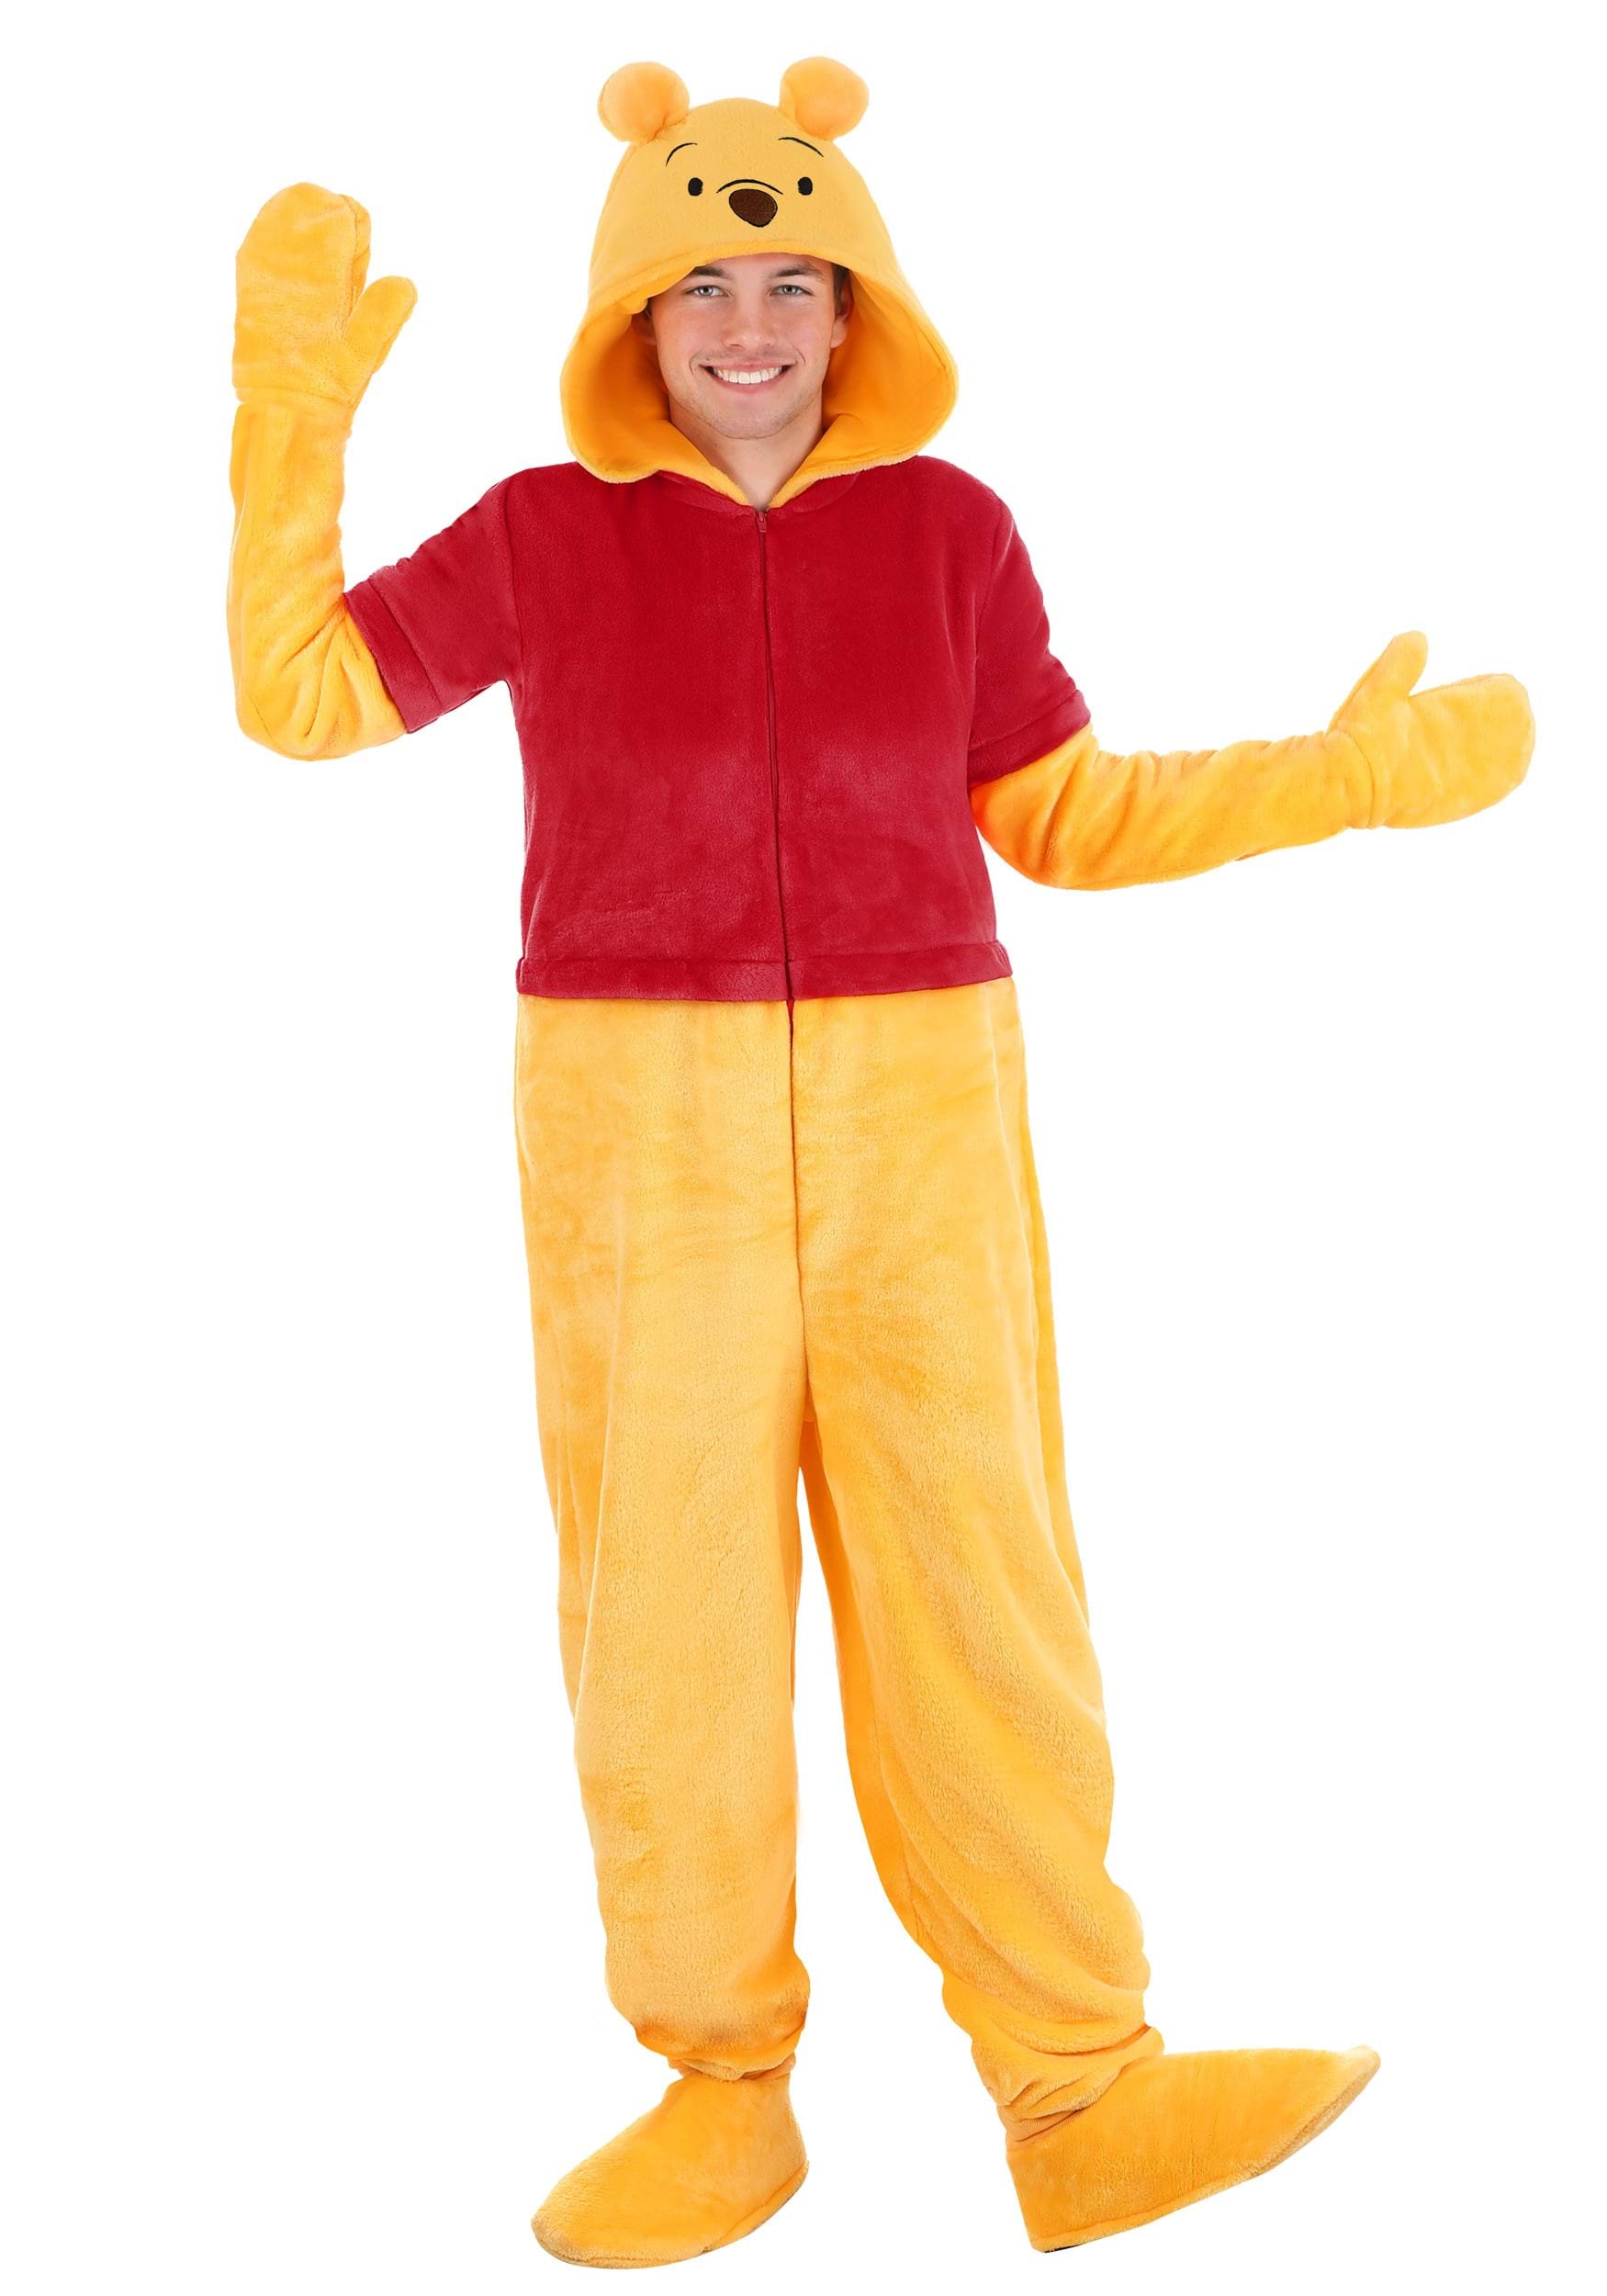 Image of Adult Deluxe Disney Winnie the Pooh Costume ID FUN4712AD-XL